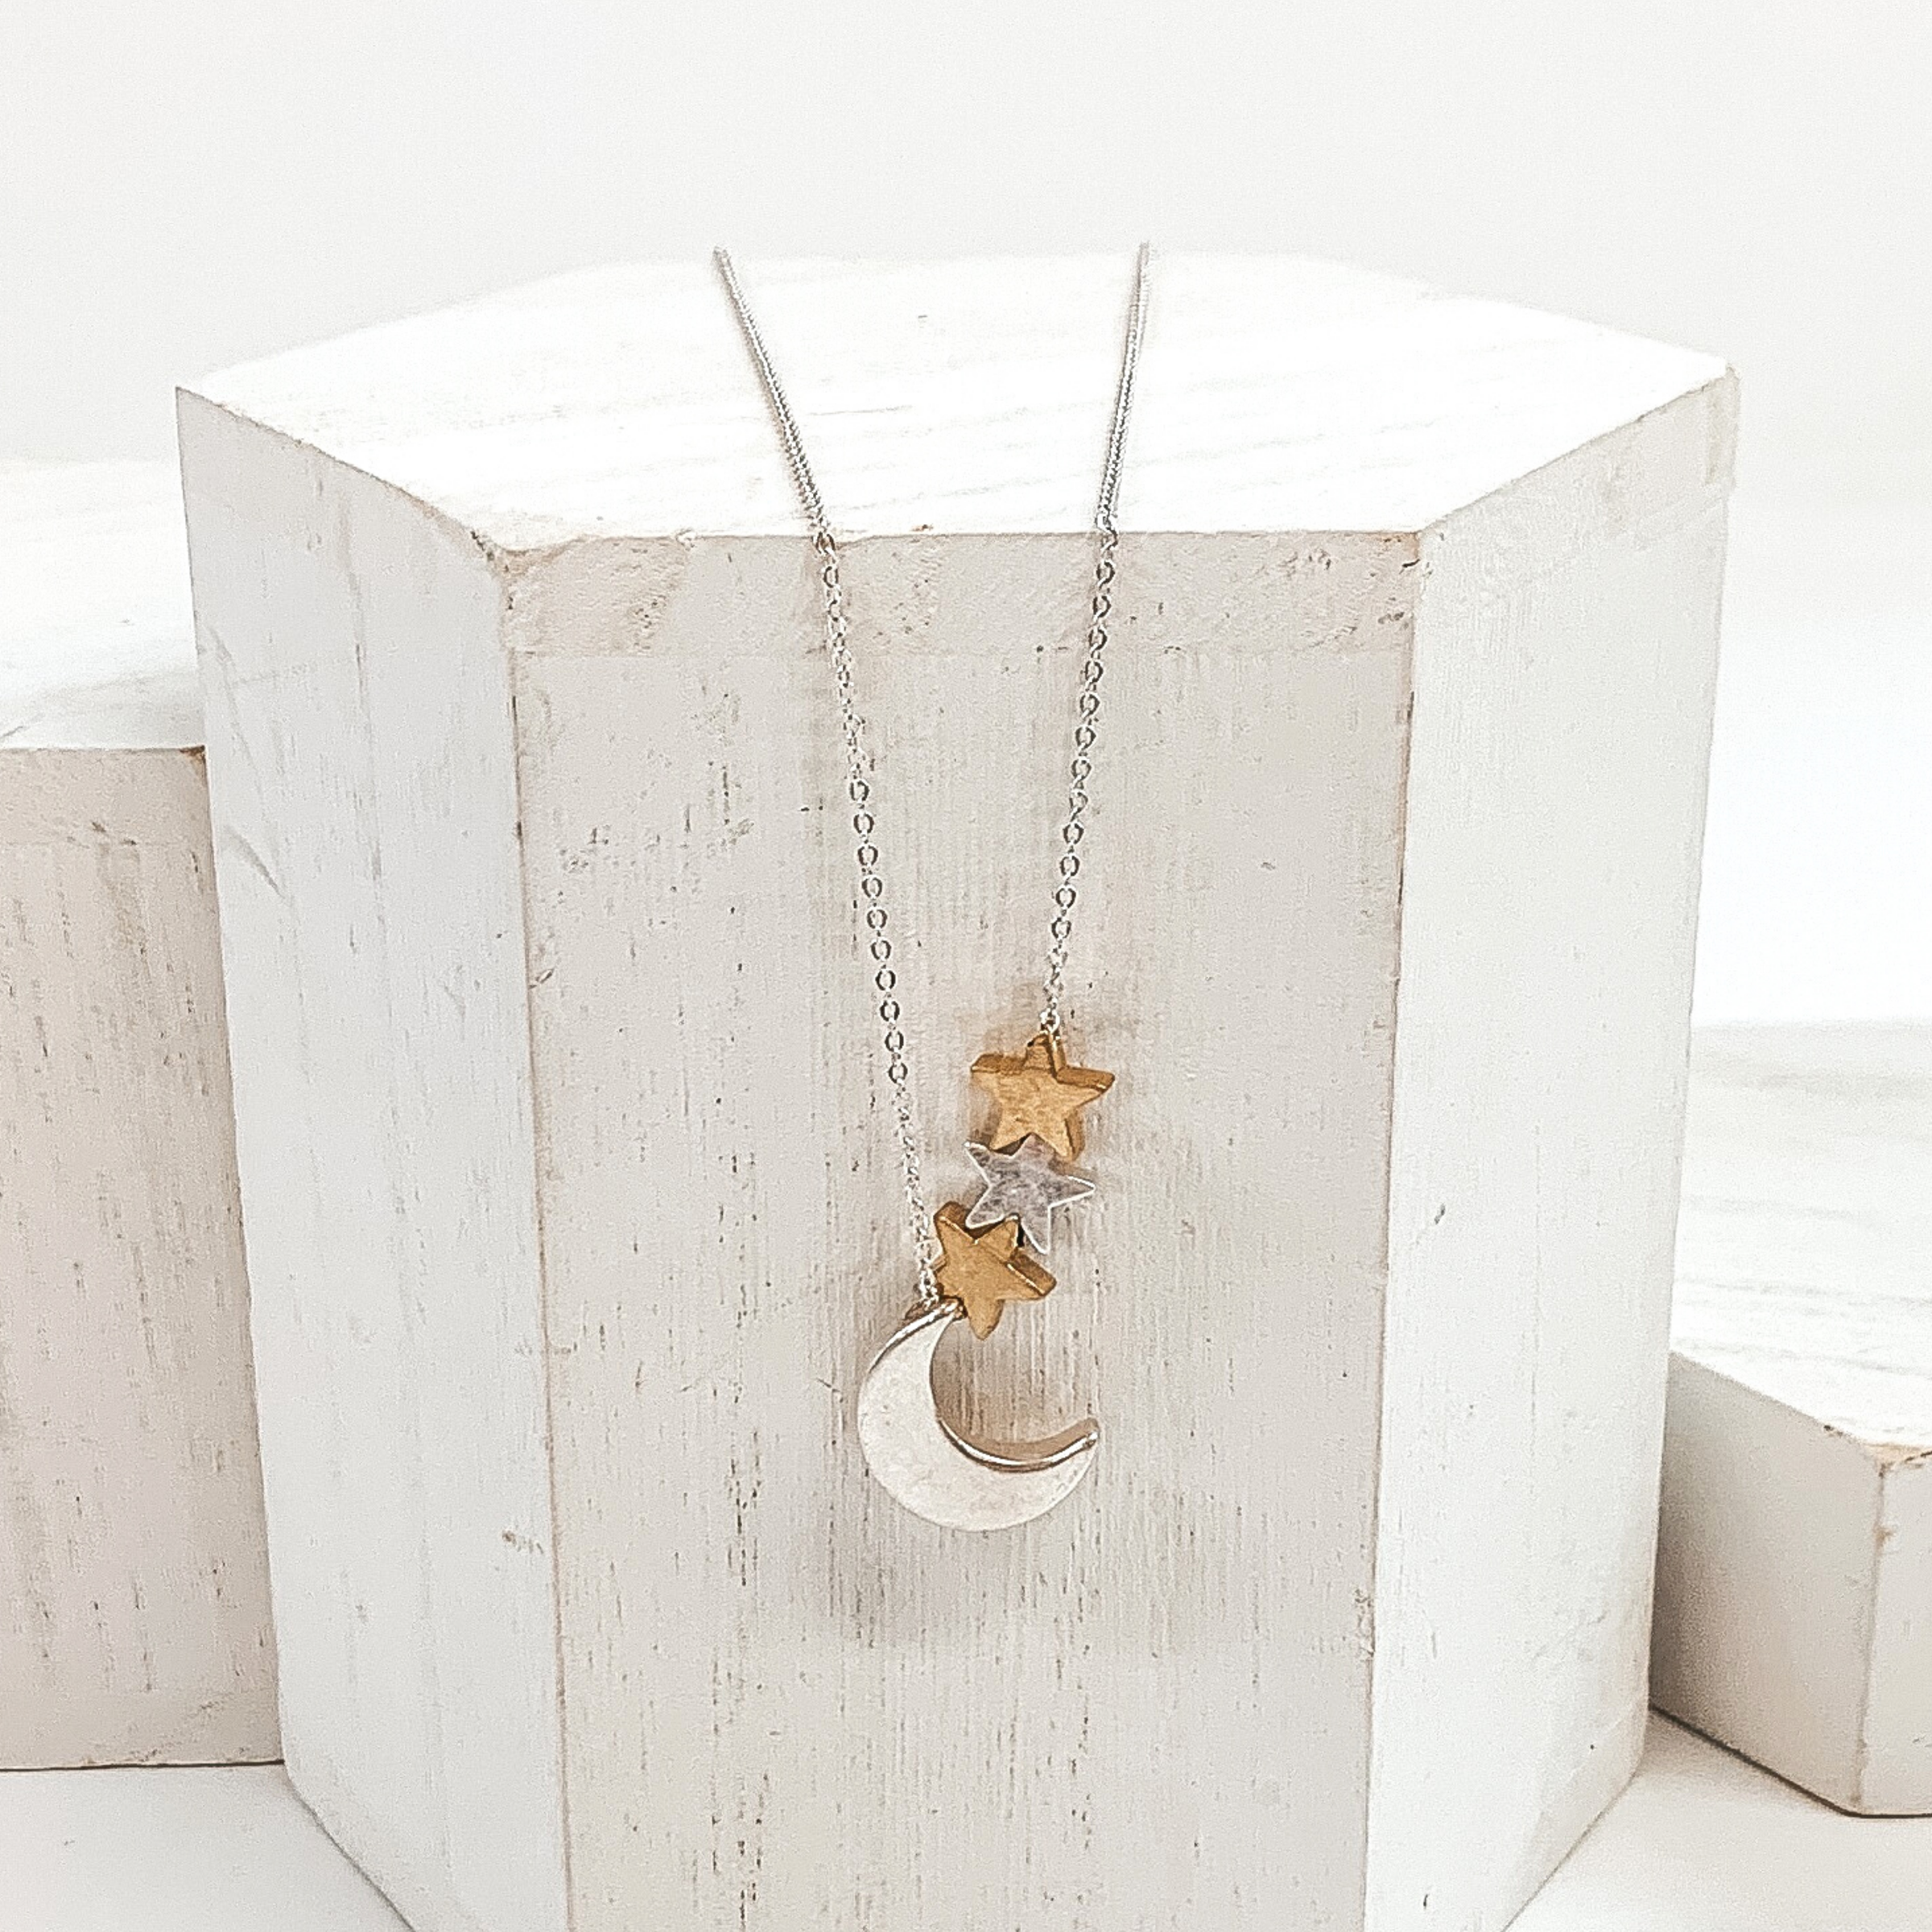 Simple silver necklace with silver moon charm, one silver star charm, and two gold star charms. This necklace is pictured on a white block on a white background.